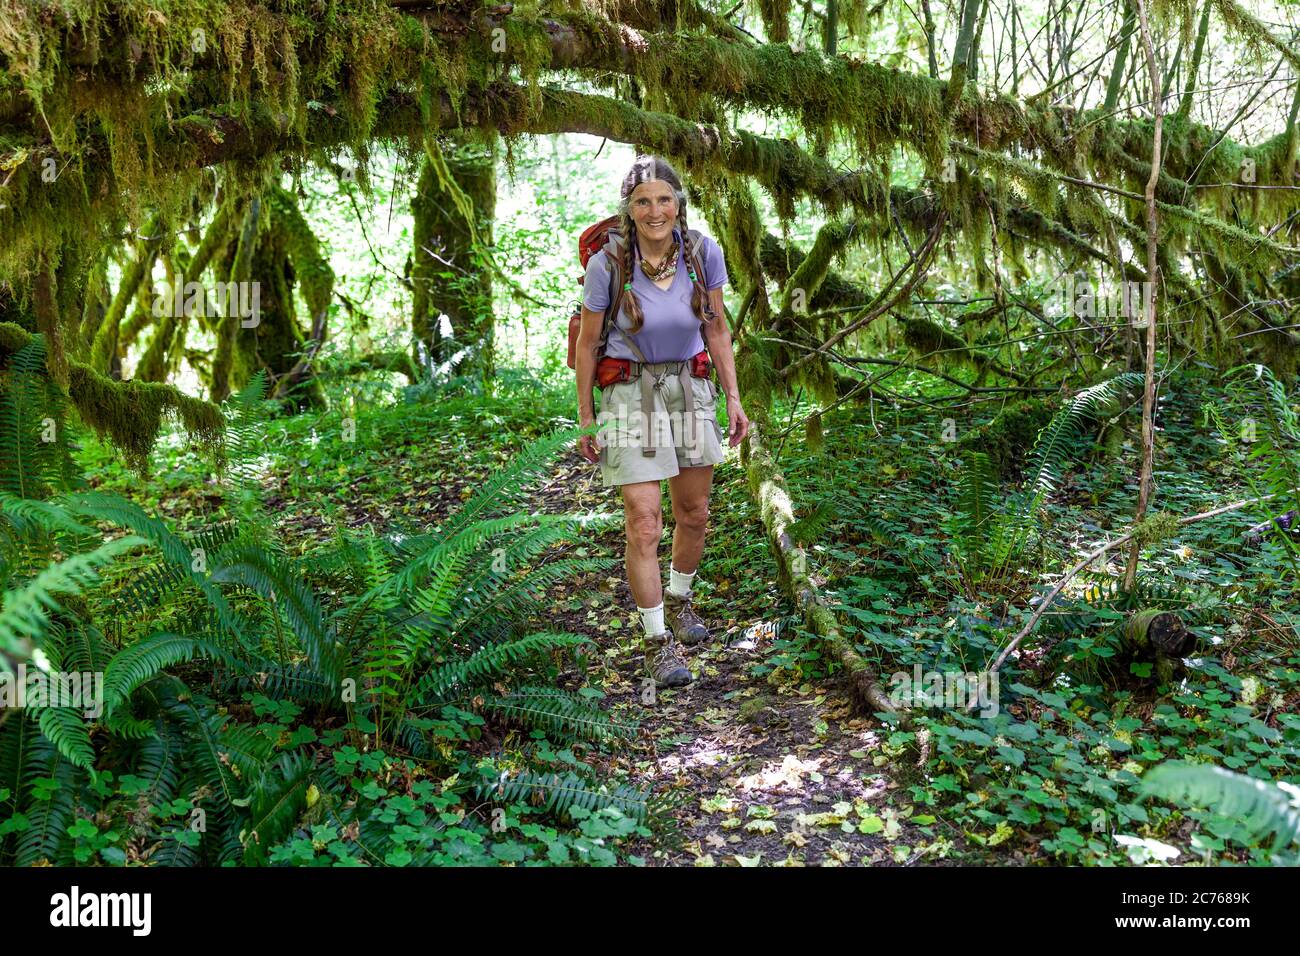 WA17470-00....WASHINGTON - Vicky Spring hiking along the Hoh River Trail in Olympic National Park. Stock Photo